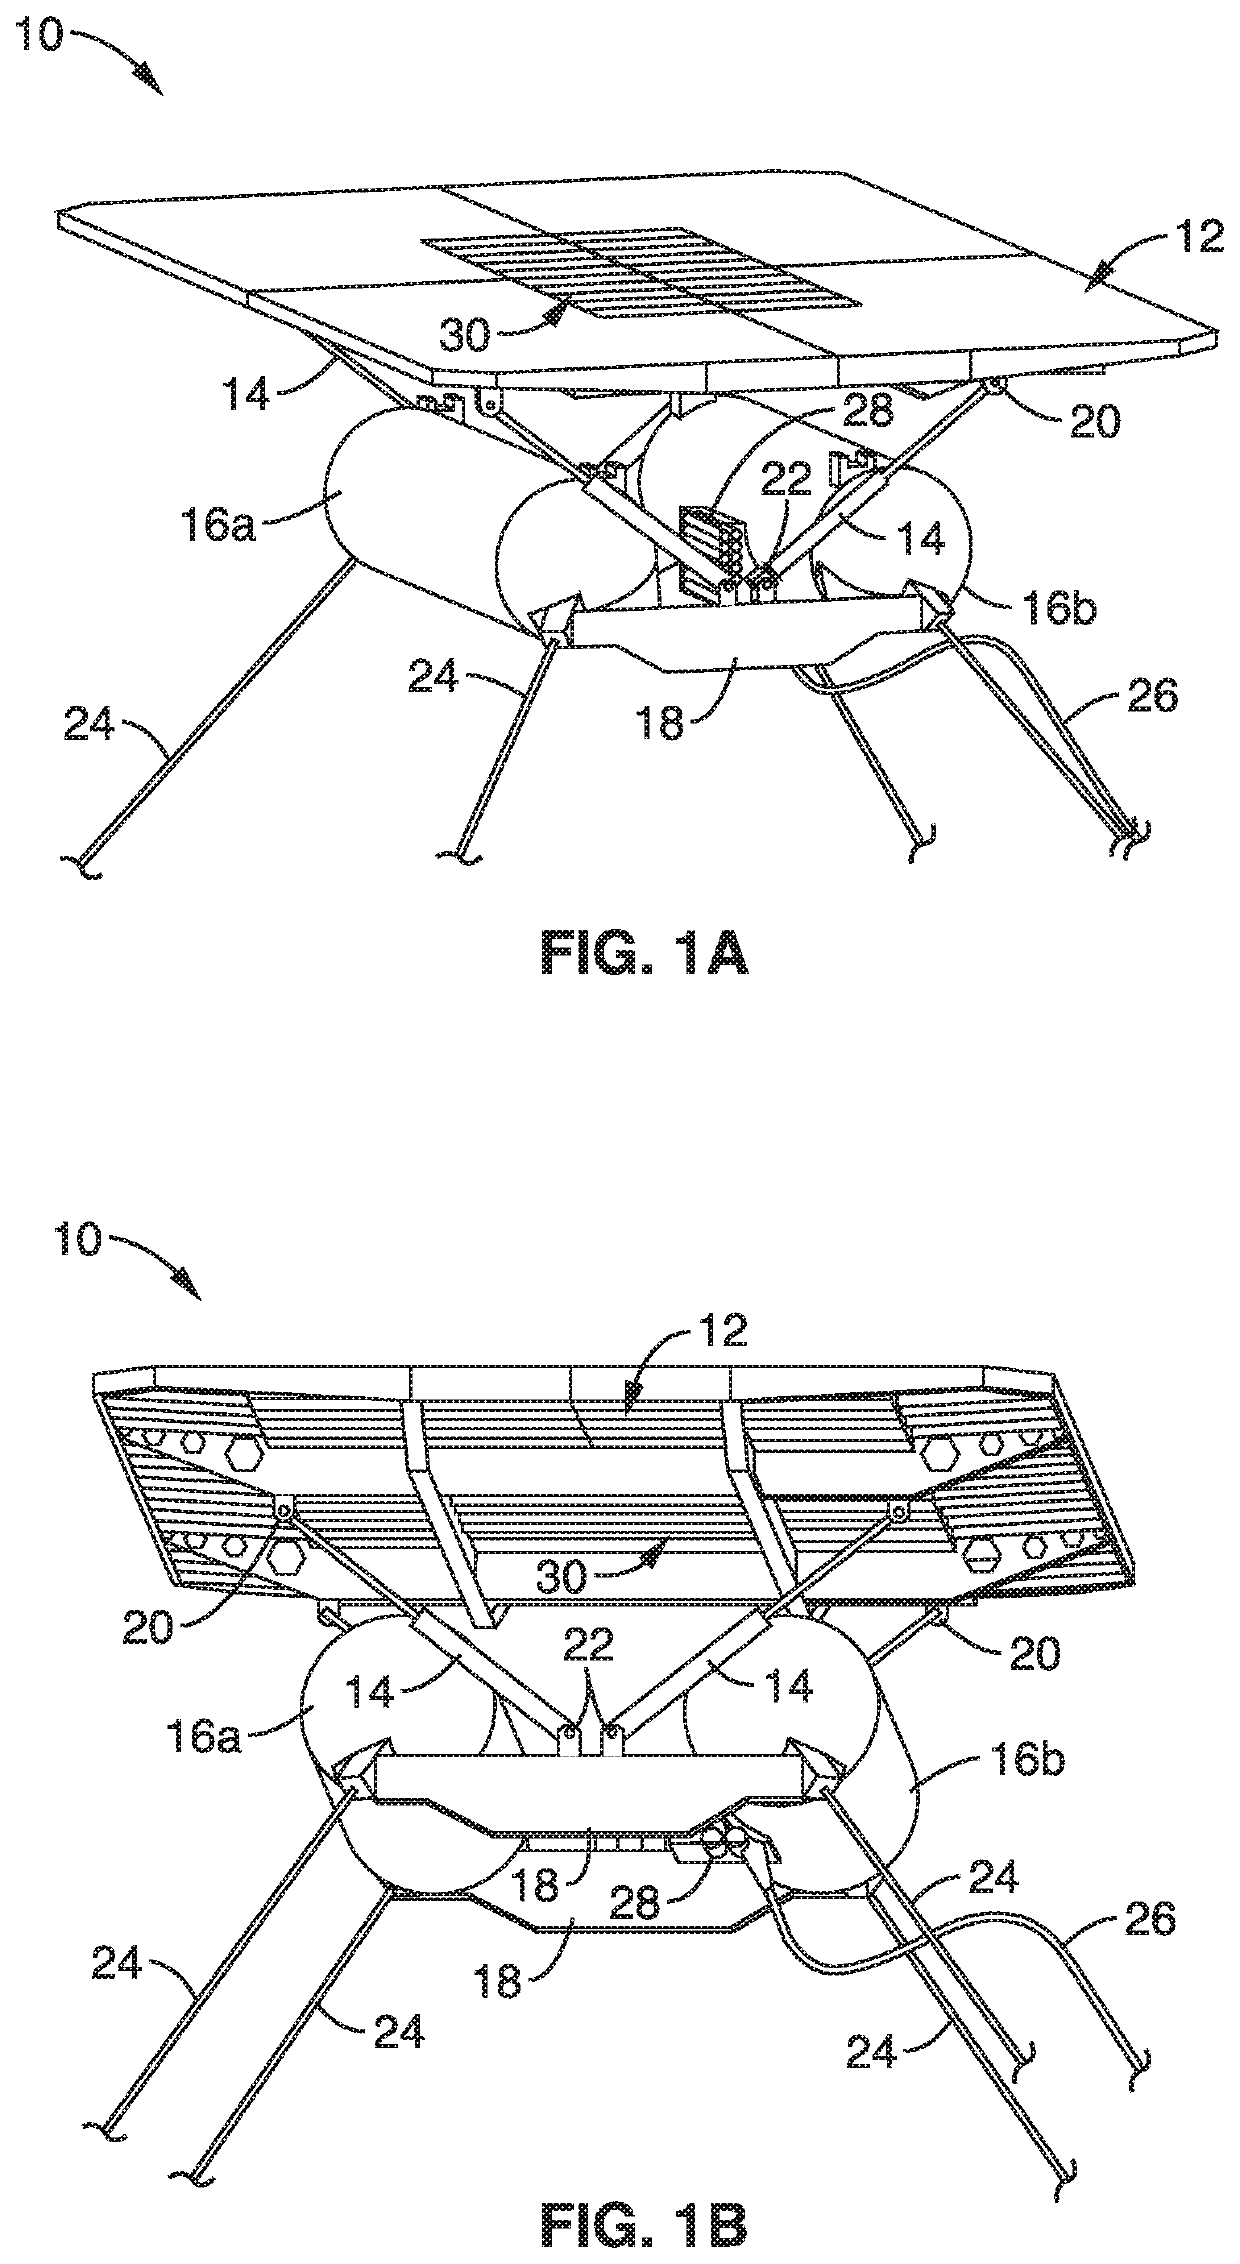 Submerged wave energy converter for shallow and deep water operations